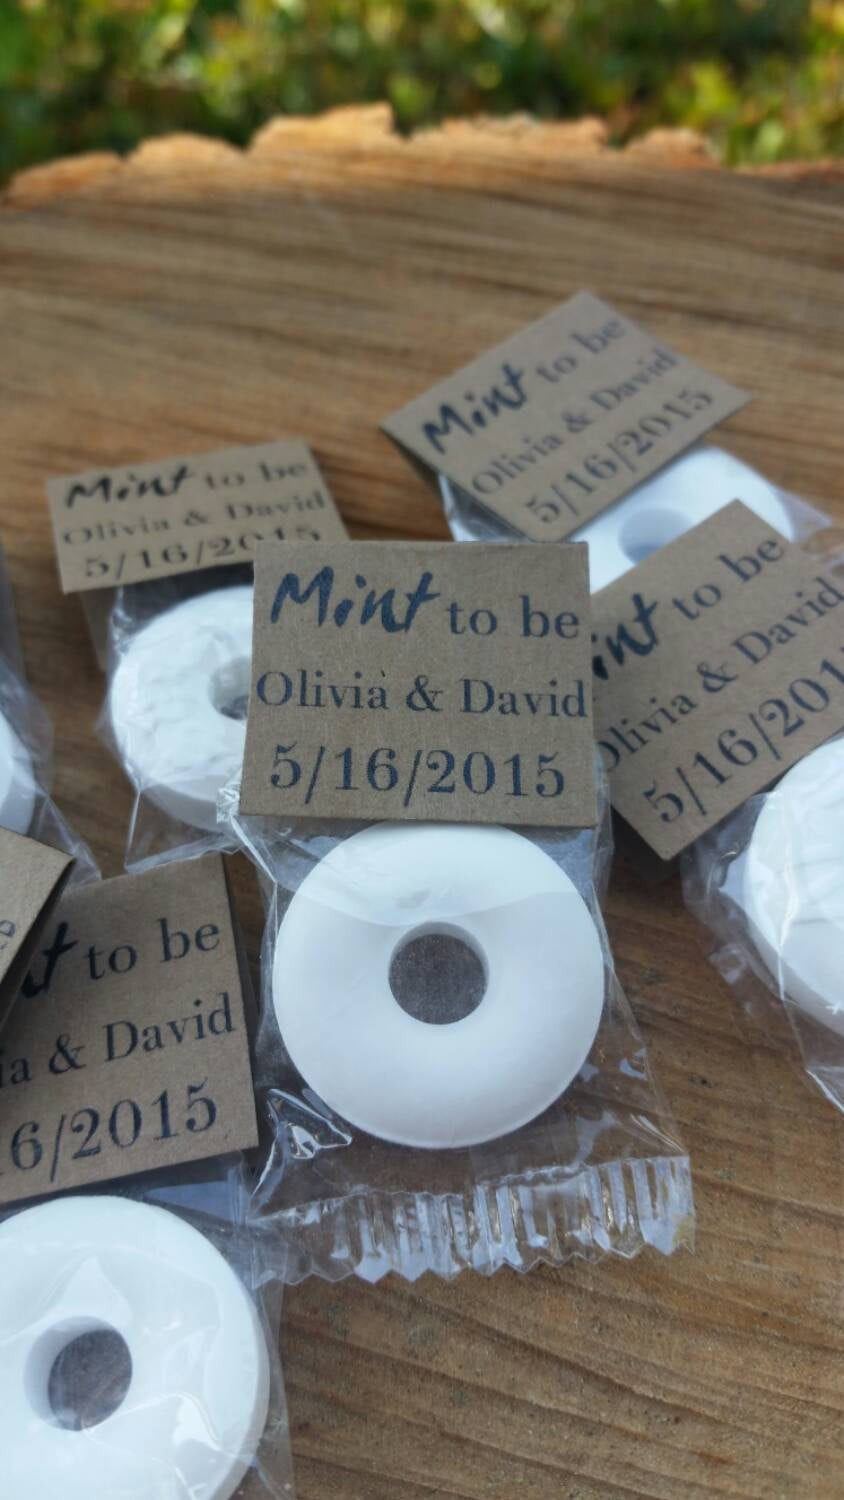 Inexpensive Wedding Favors
 100 Mint to be wedding favors Rustic wedding by TagItWithLove